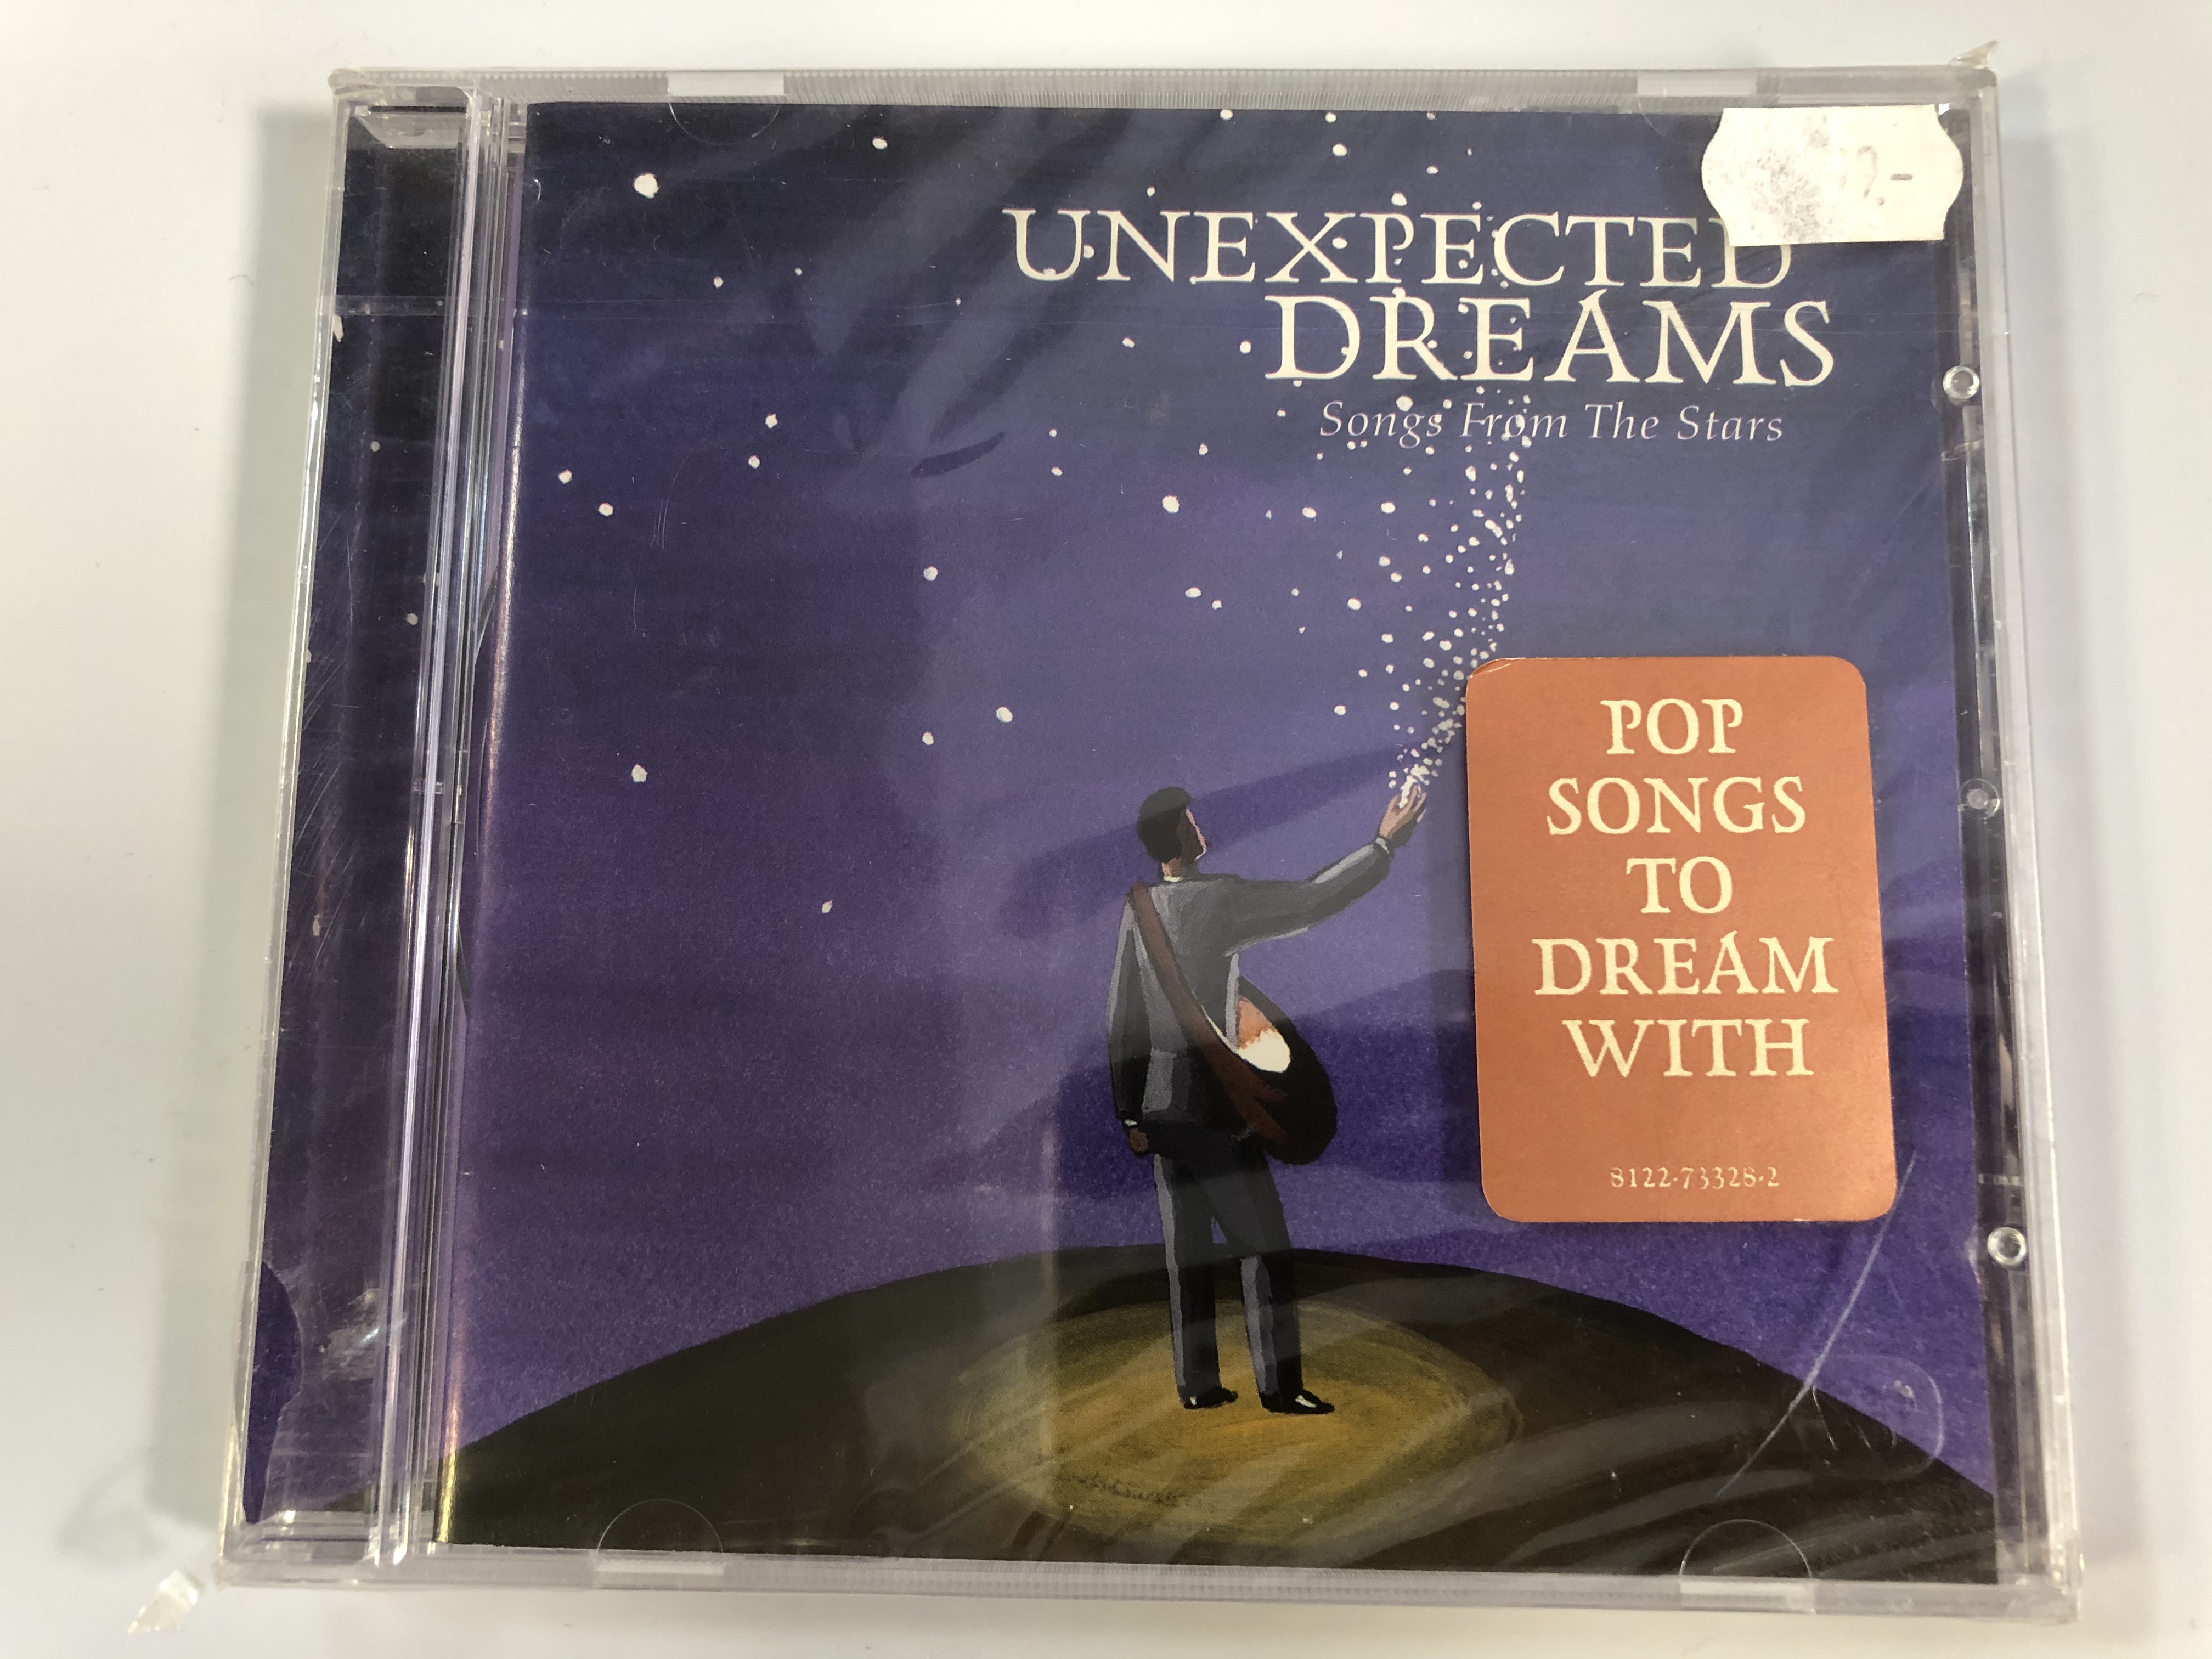 unexpected-dreams-songs-from-the-stars-pop-songs-to-dream-with-rhino-recordsaudio-cd-2006-8122-73328-2-1-.jpg